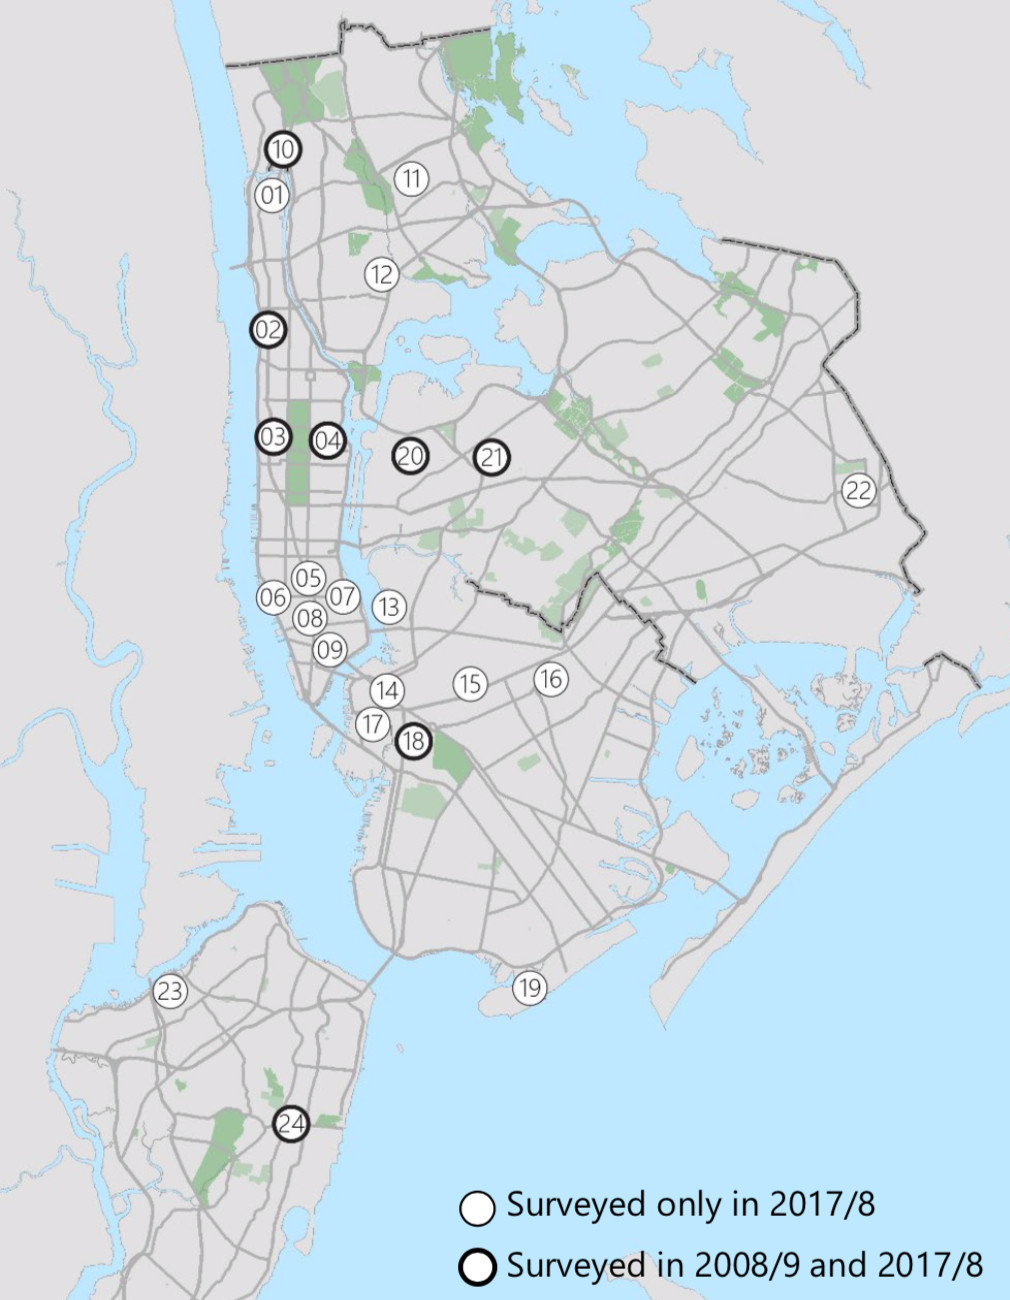 A map of New York City with numbered circles highlighting the neighborhoods studied by the city.